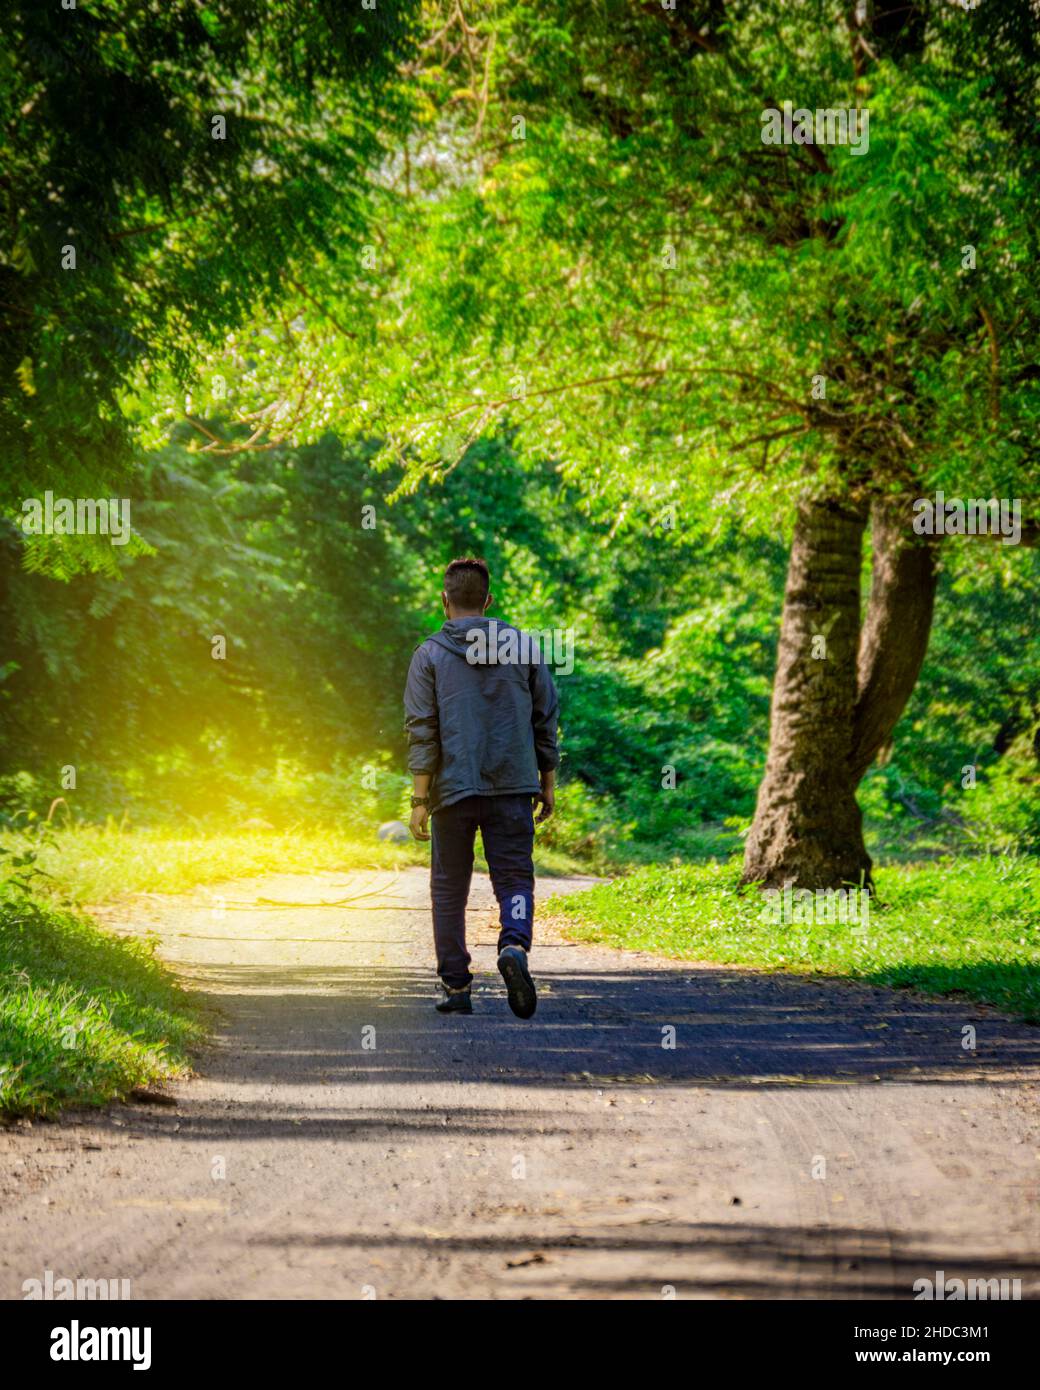 Latin man walking on a nice road, rear view of a young man walking on a road surrounded by trees Stock Photo